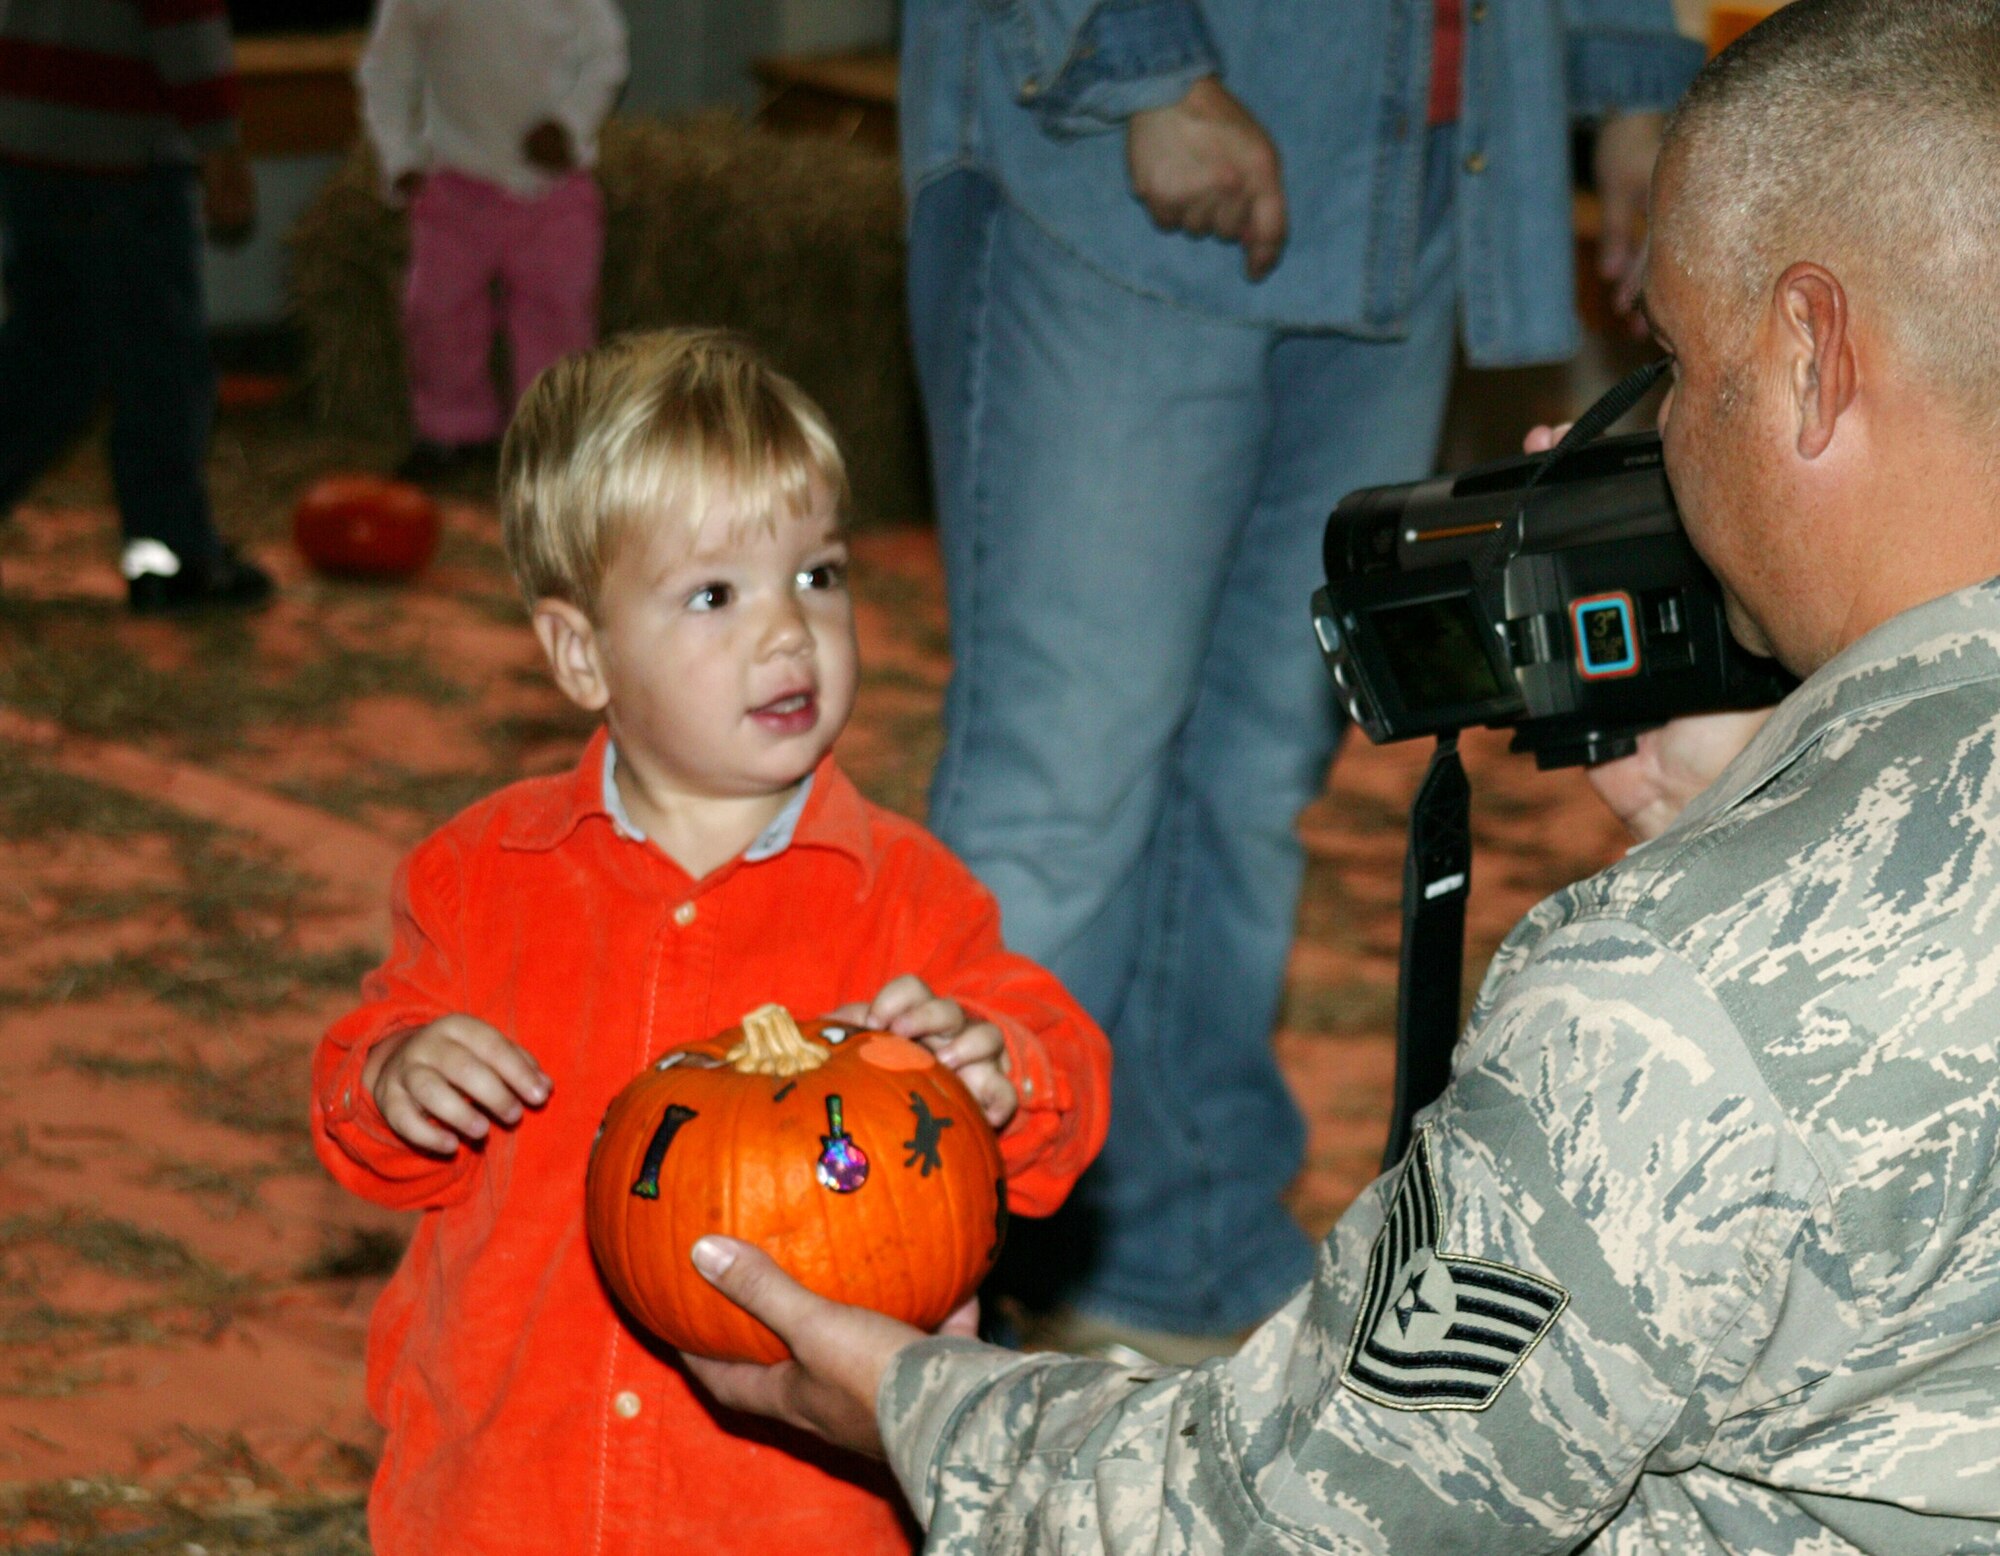 SHAW AIR FORCE BASE, S.C. -- Tech. Sgt. Harold Denton, 20th Aerospace Medicine Squadron, films his son Chase at the Shaw CDC Harvest Fest Oct. 25. Chase's mom, Julie, is the deputy director of the Child Development Center. (U.S. Air Force photo/Tech. Sgt. Kevin Williams)